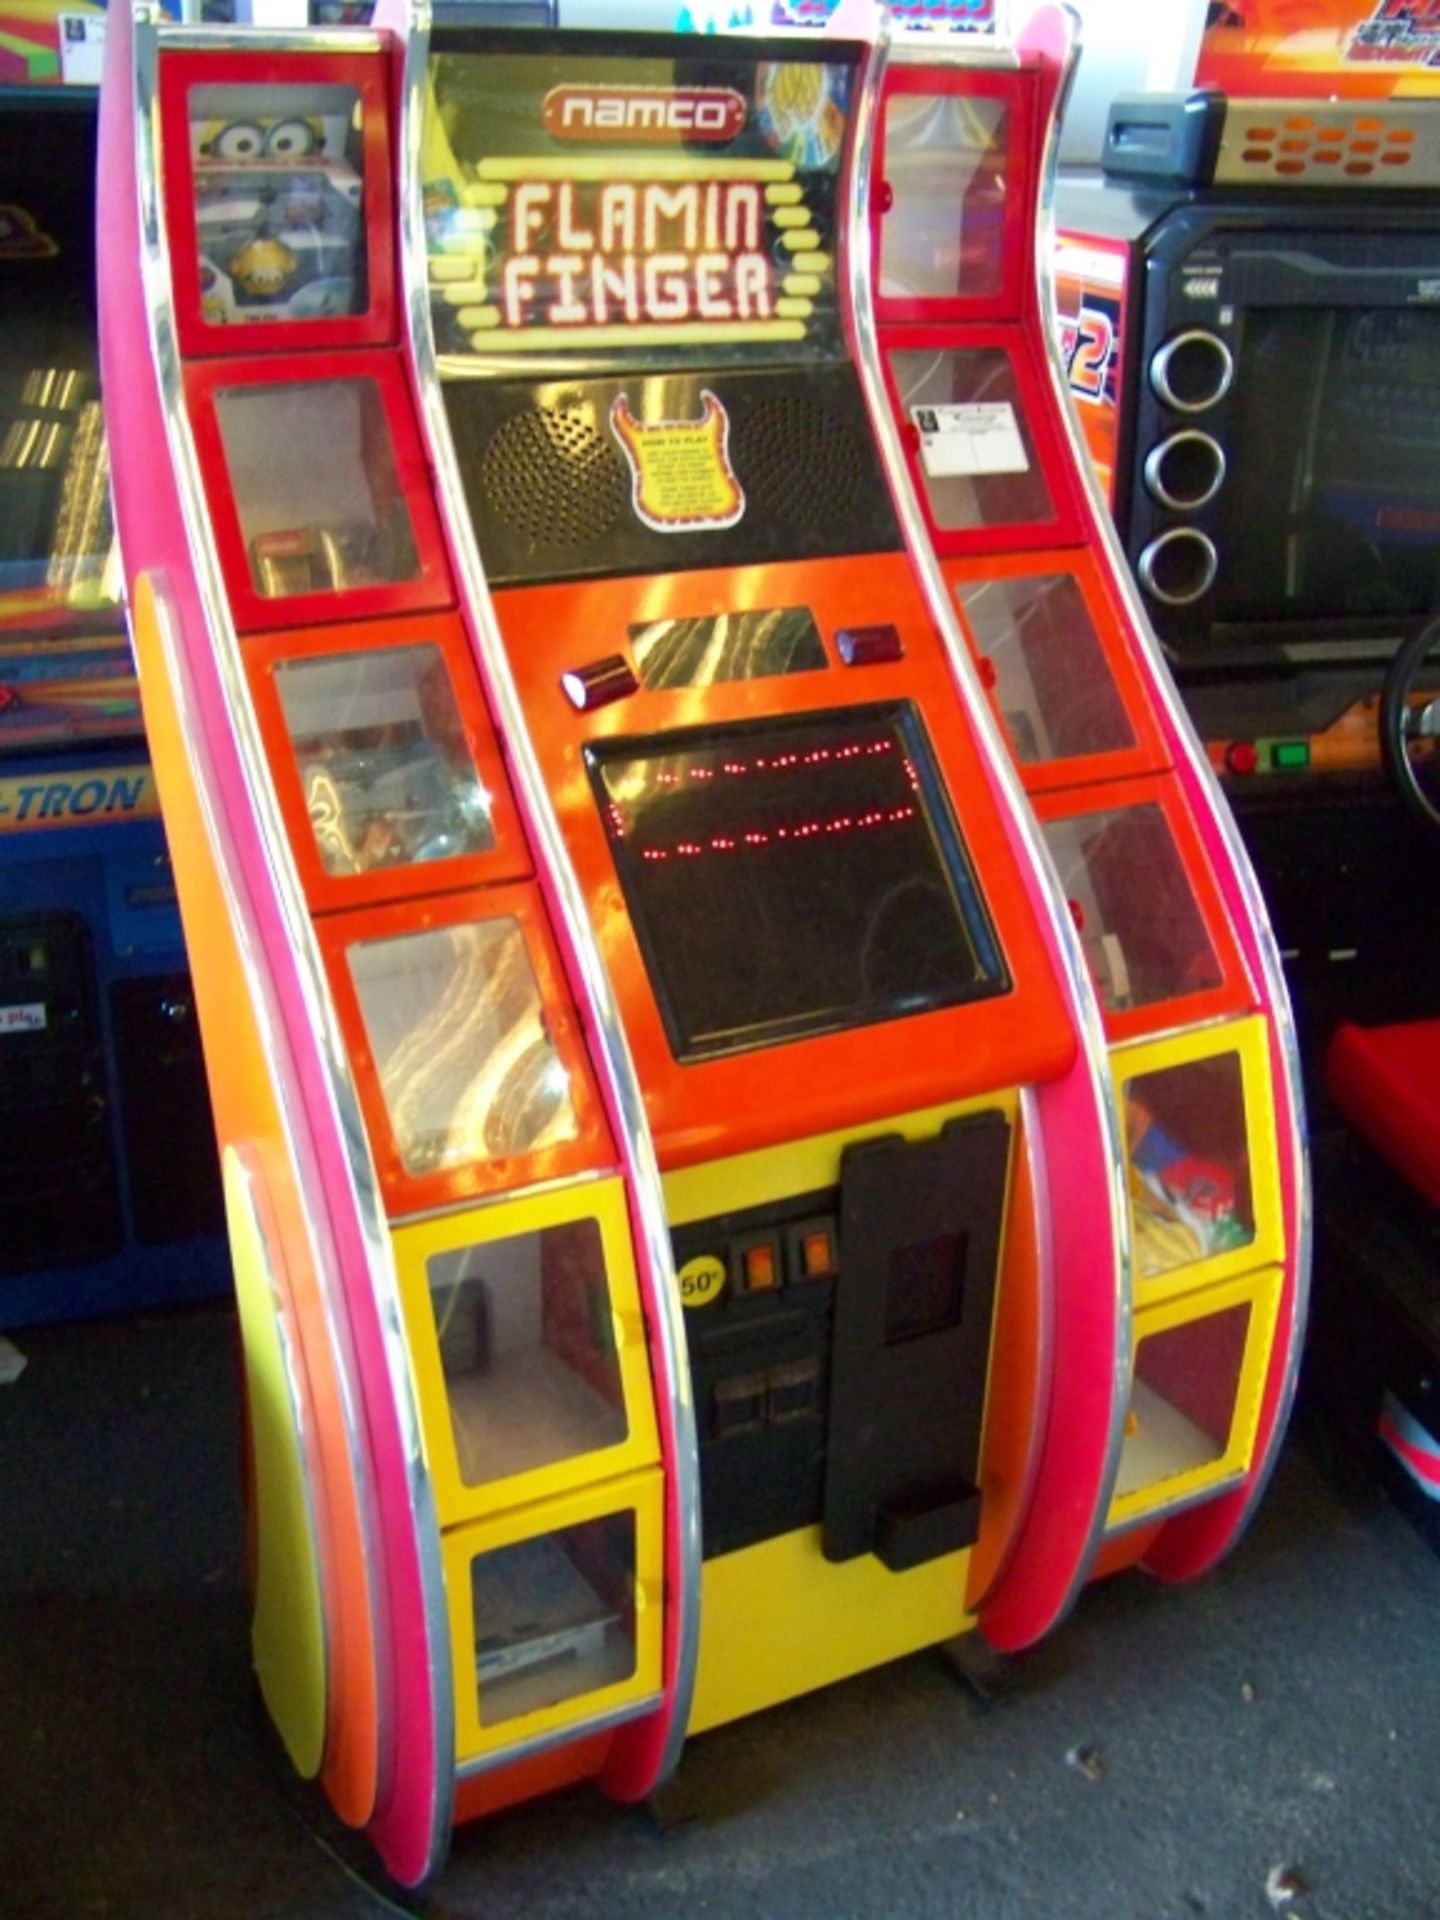 FLAMIN FINGER PRIZE REDEMPTION GAME NAMCO AE